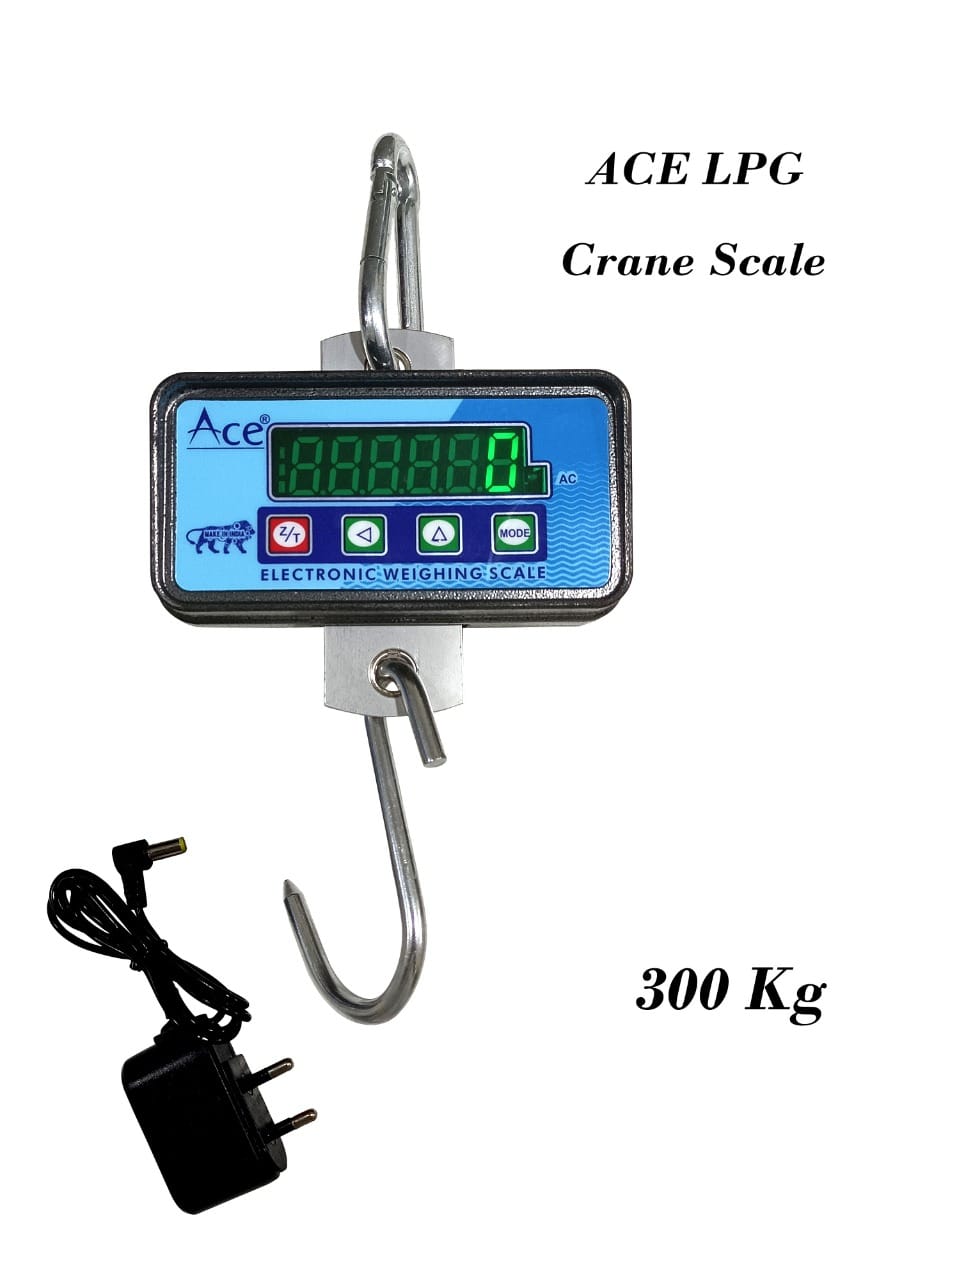 Ace Hanging Type Weight Scale Weighing Machine 300 kg